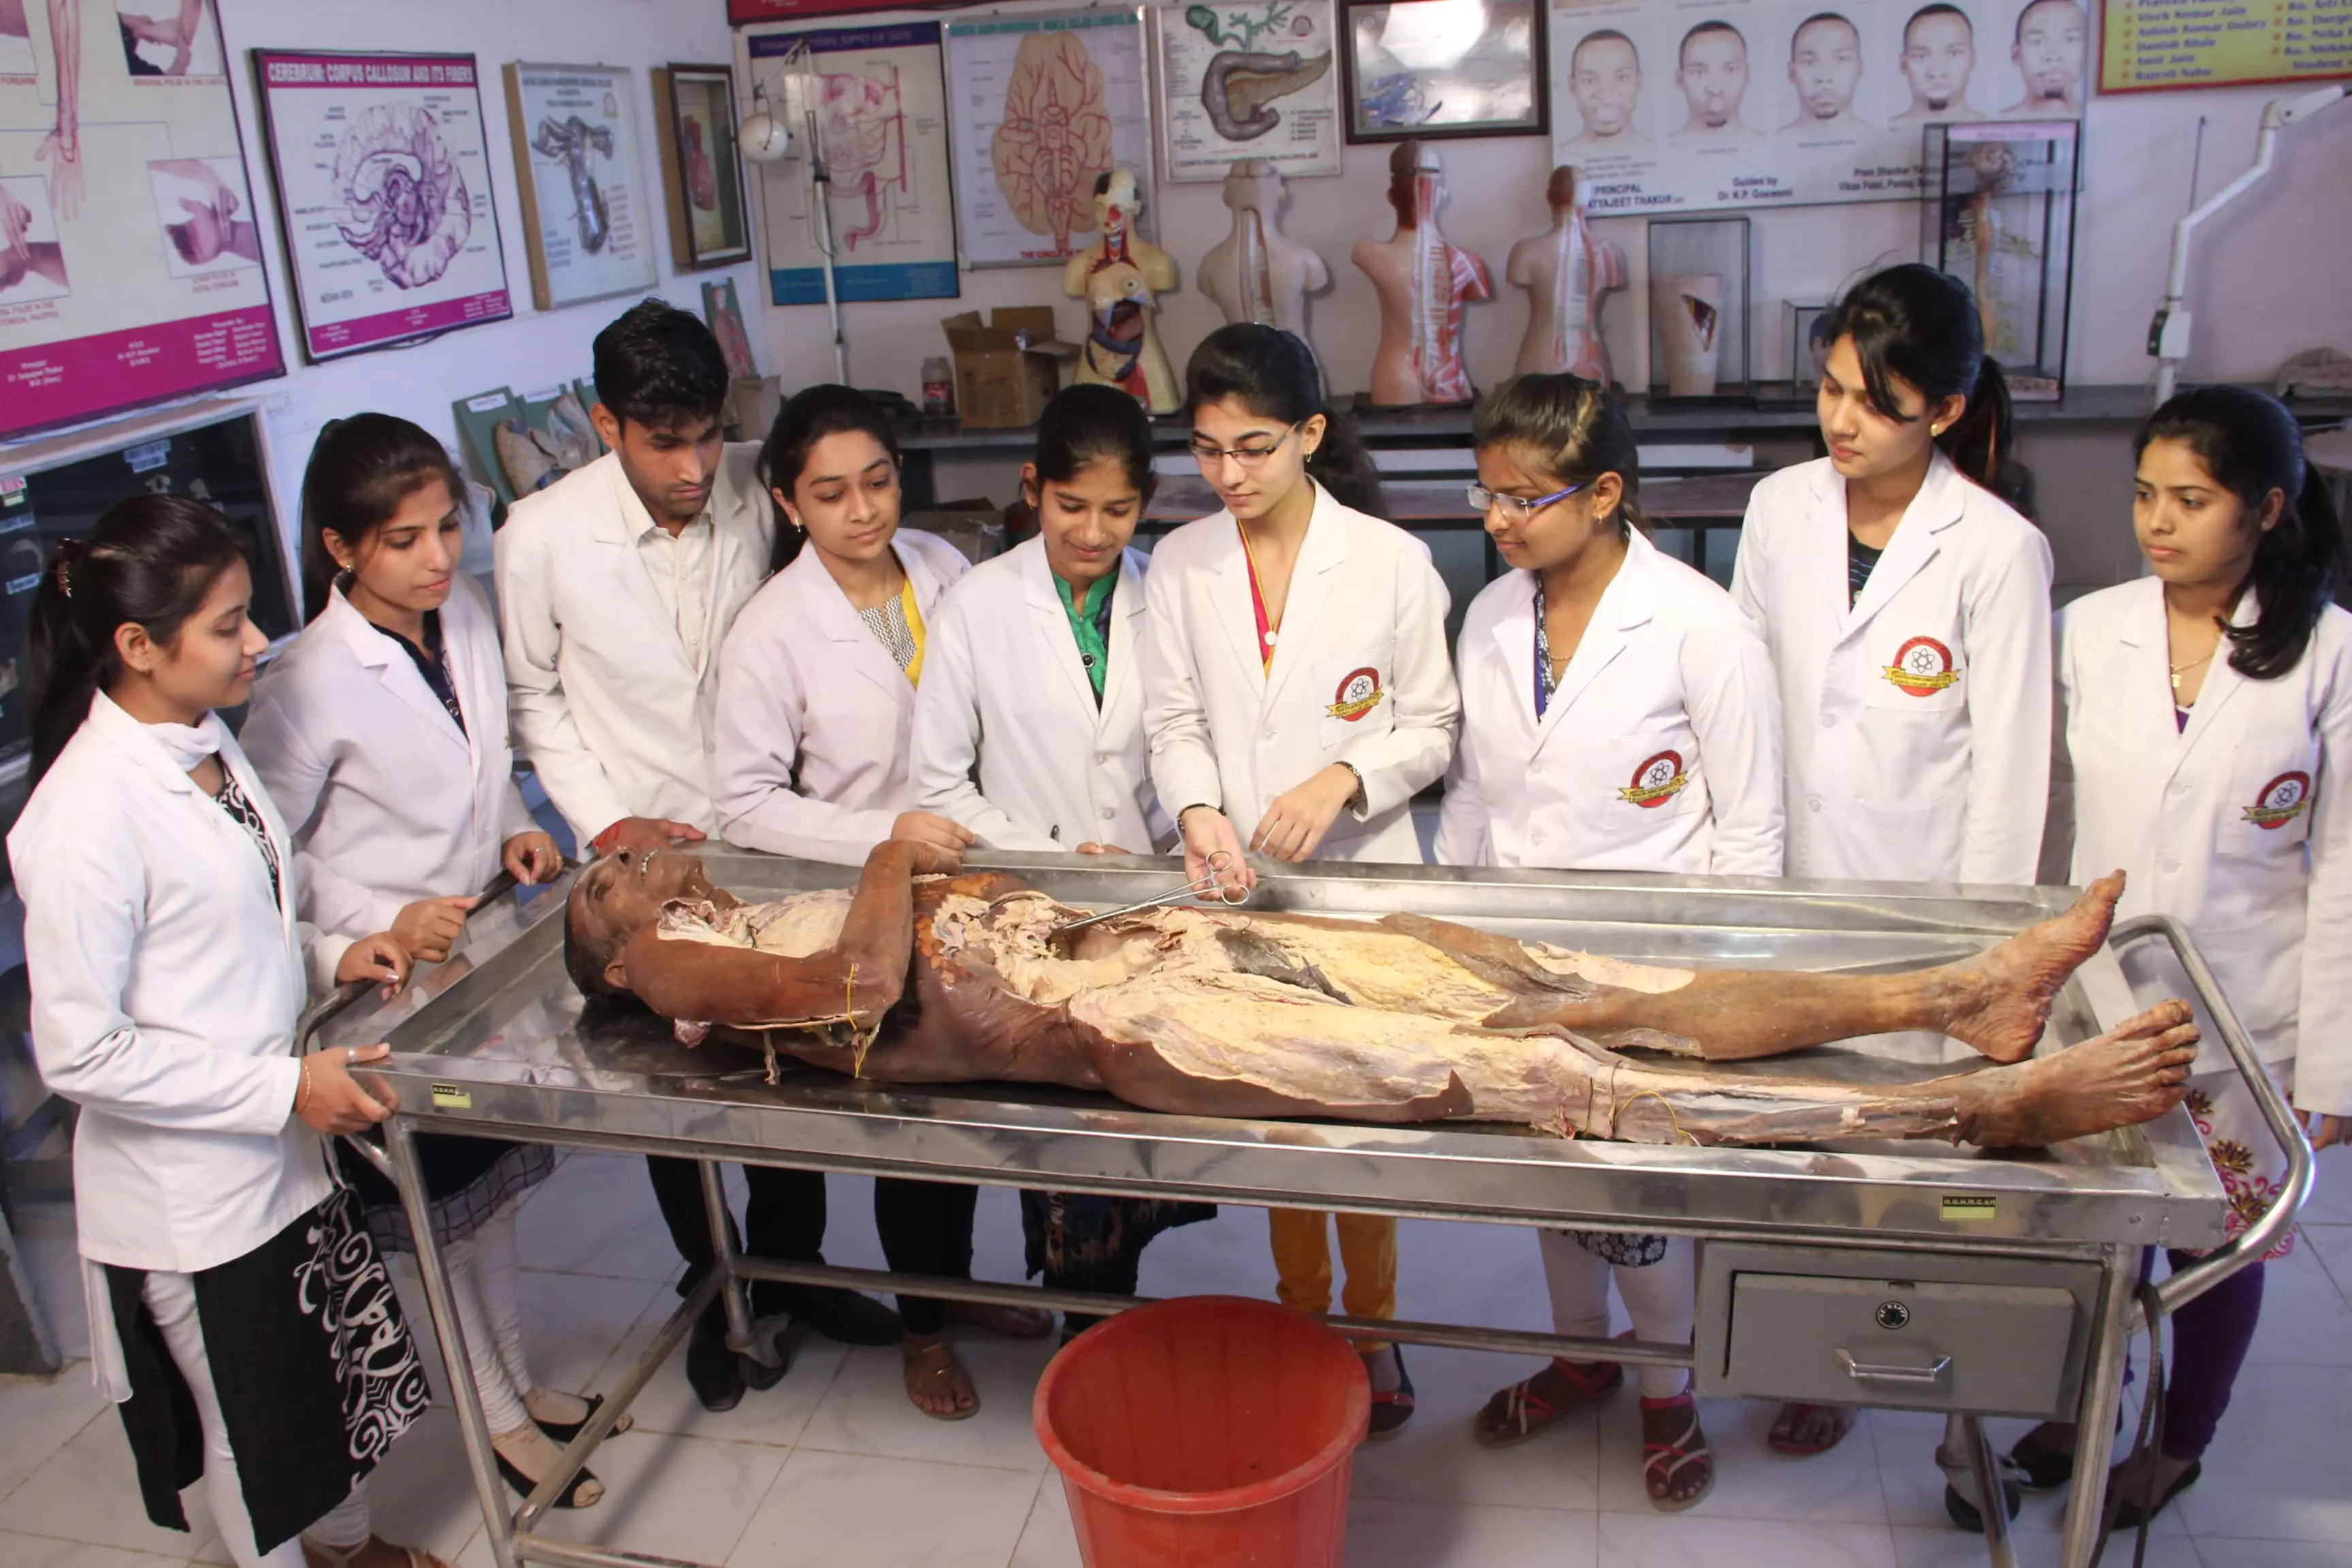 Students performing surgery on a human body.